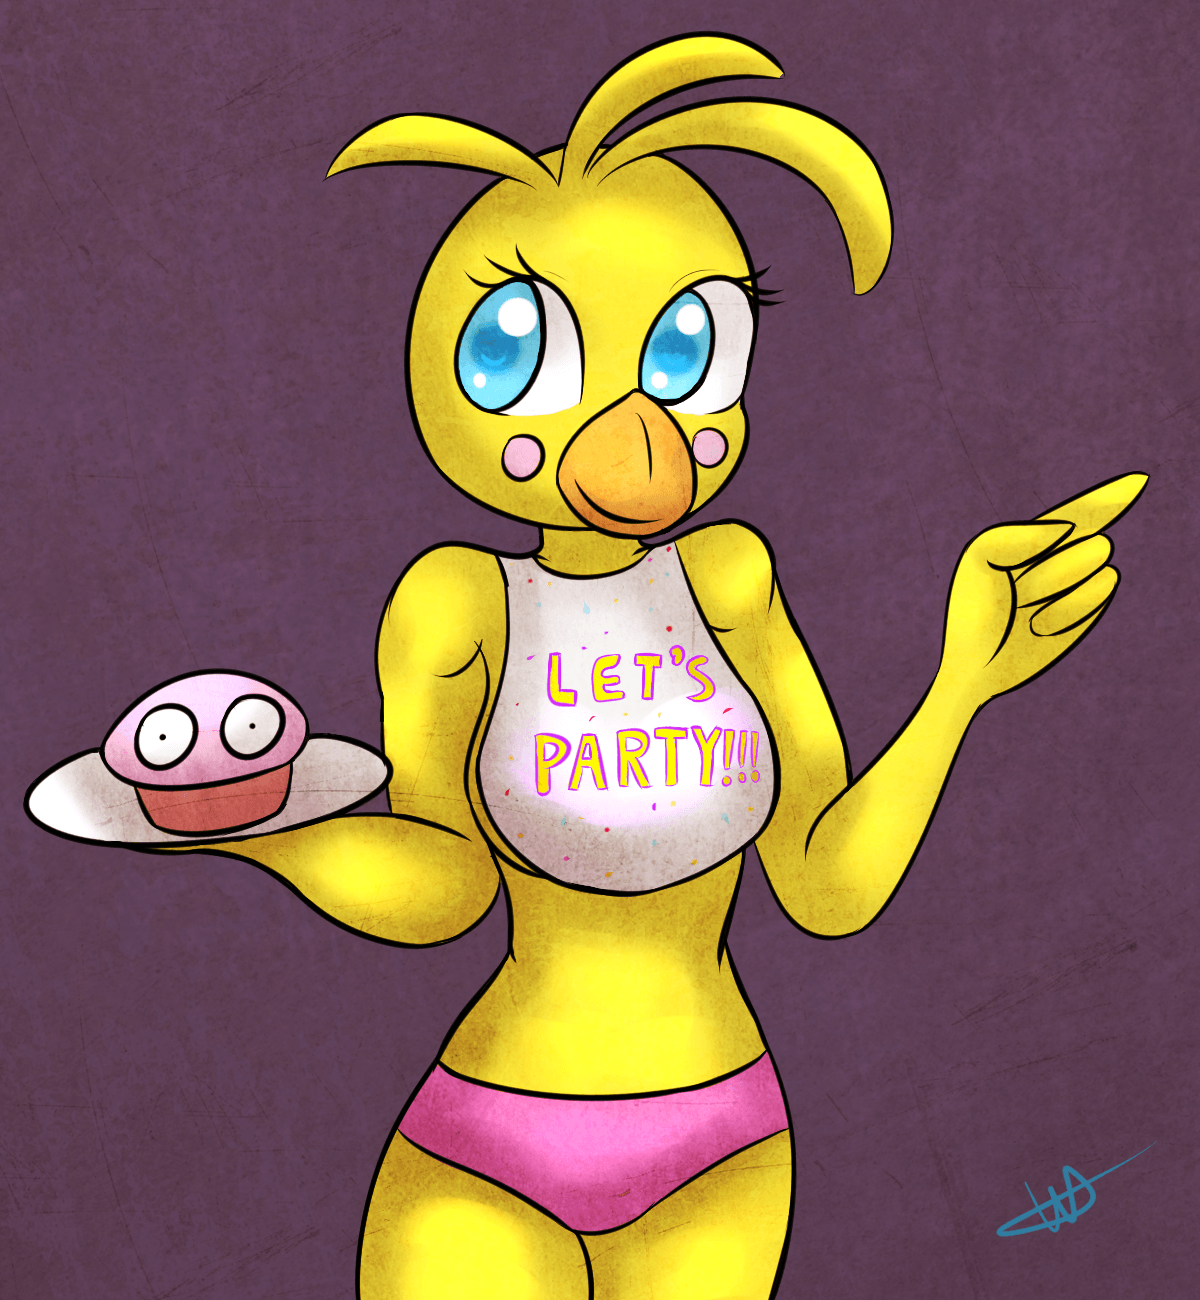 Five Nights at Freddy's image toy chica by gwarrior456 d870h30 HD